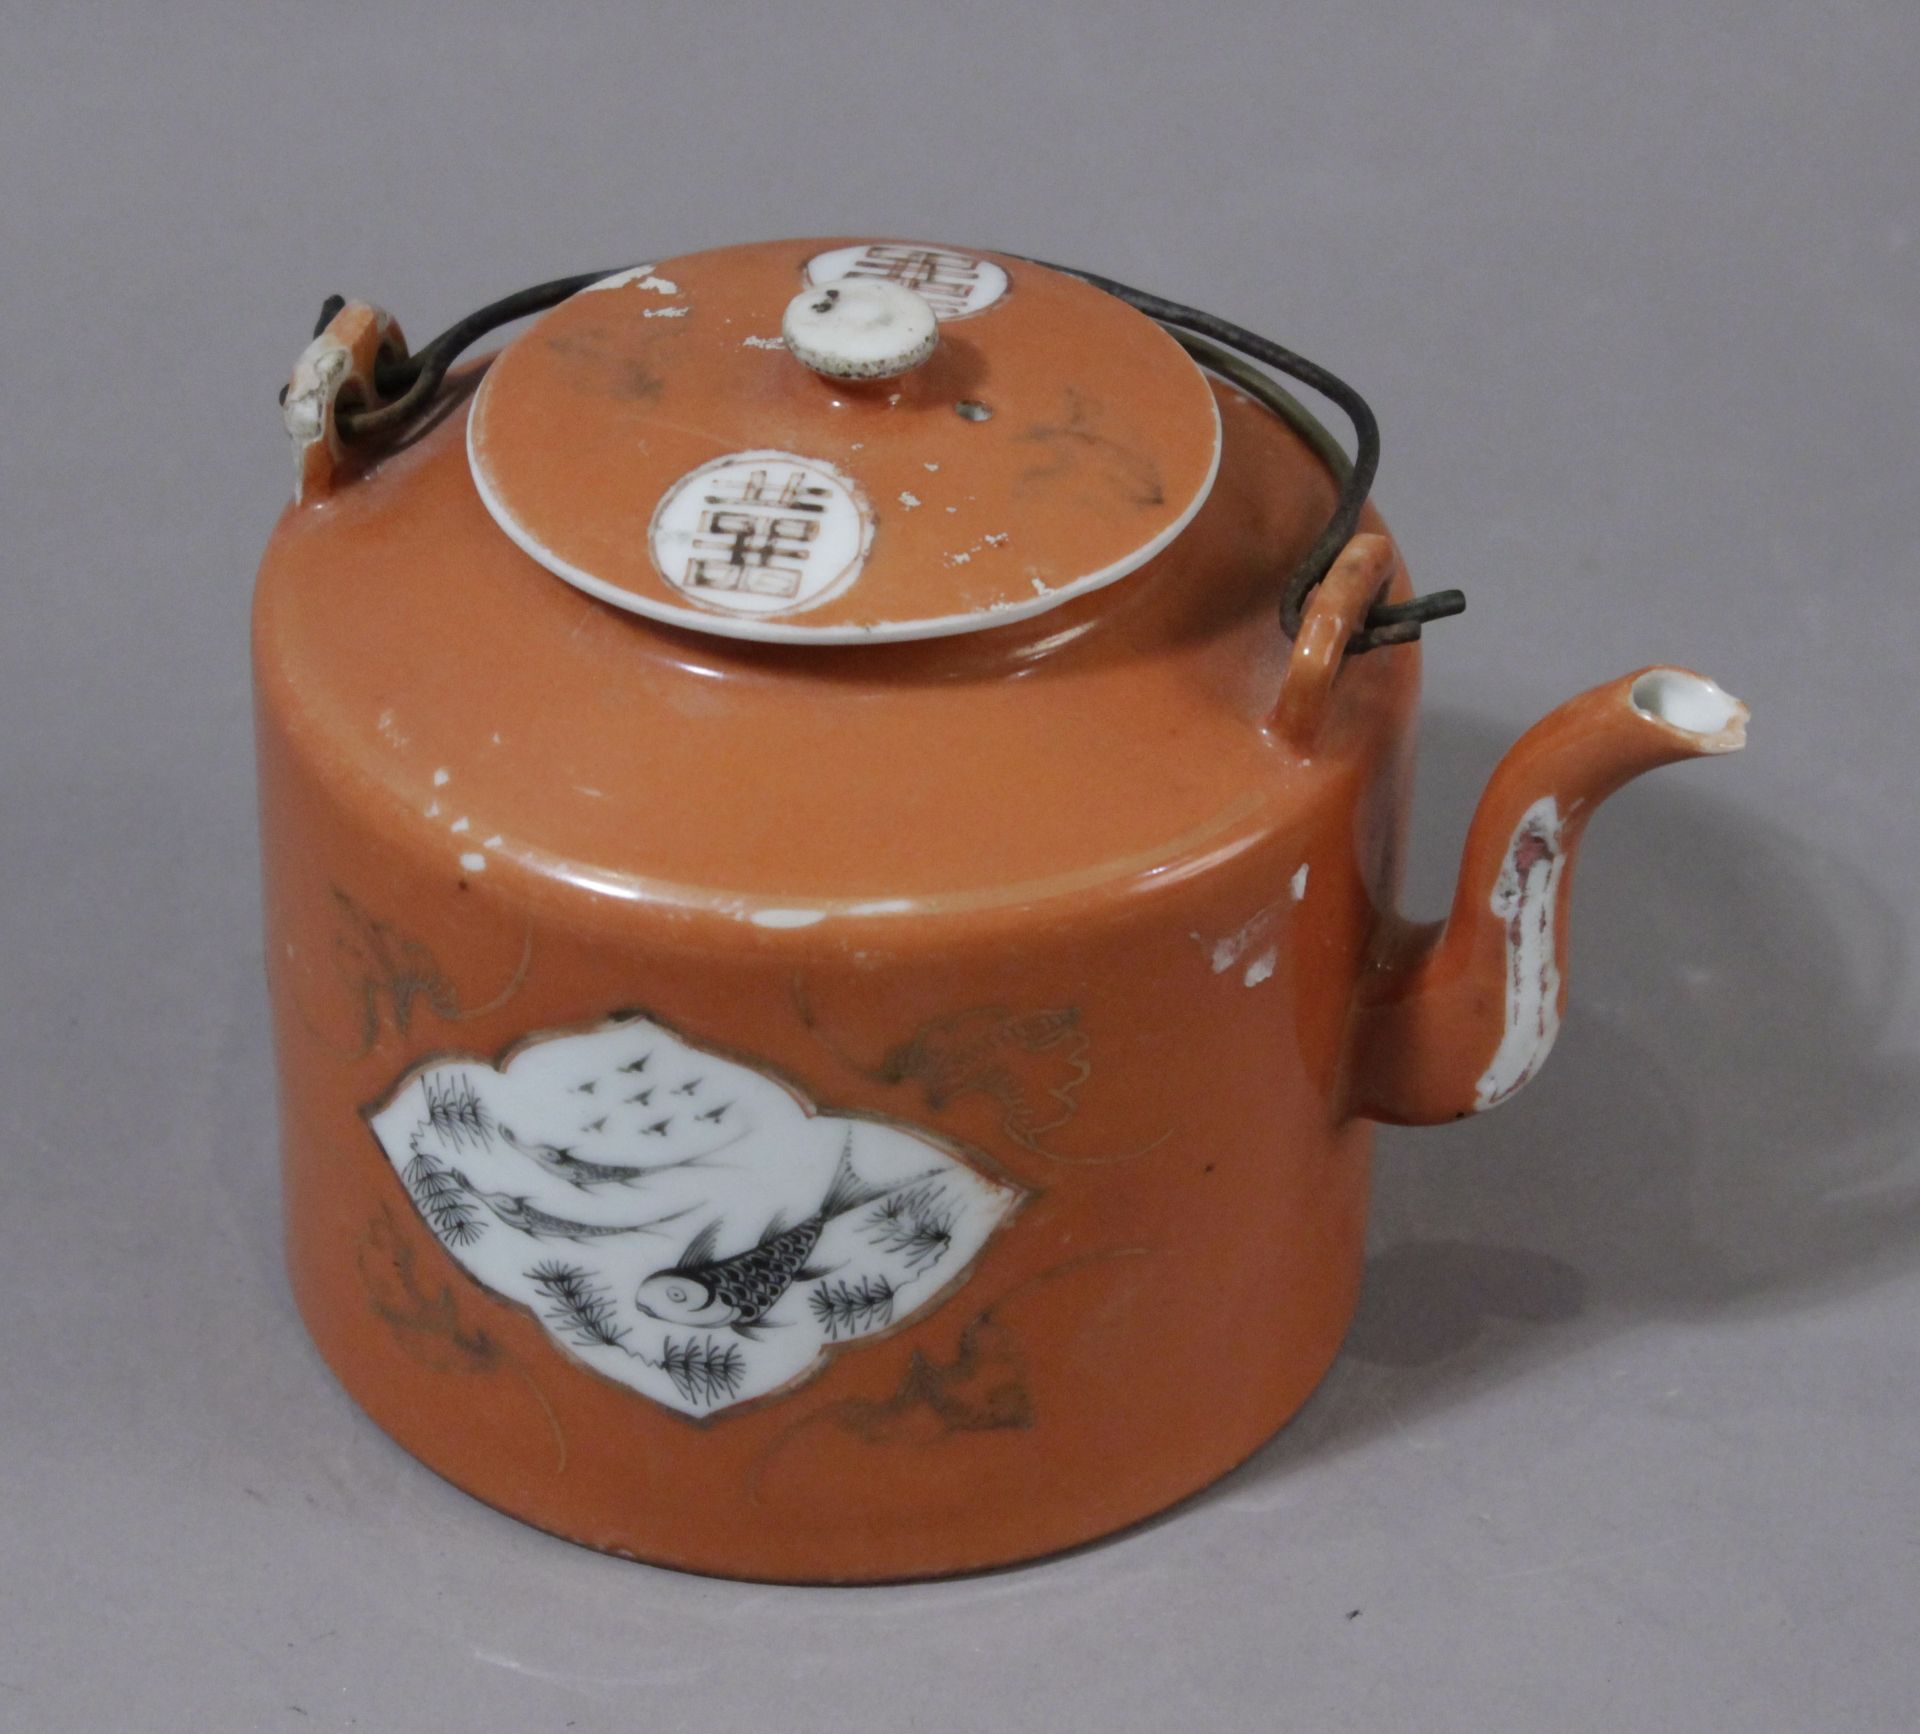 An early 20th century Chinese teapot in Famille Rose porcelain